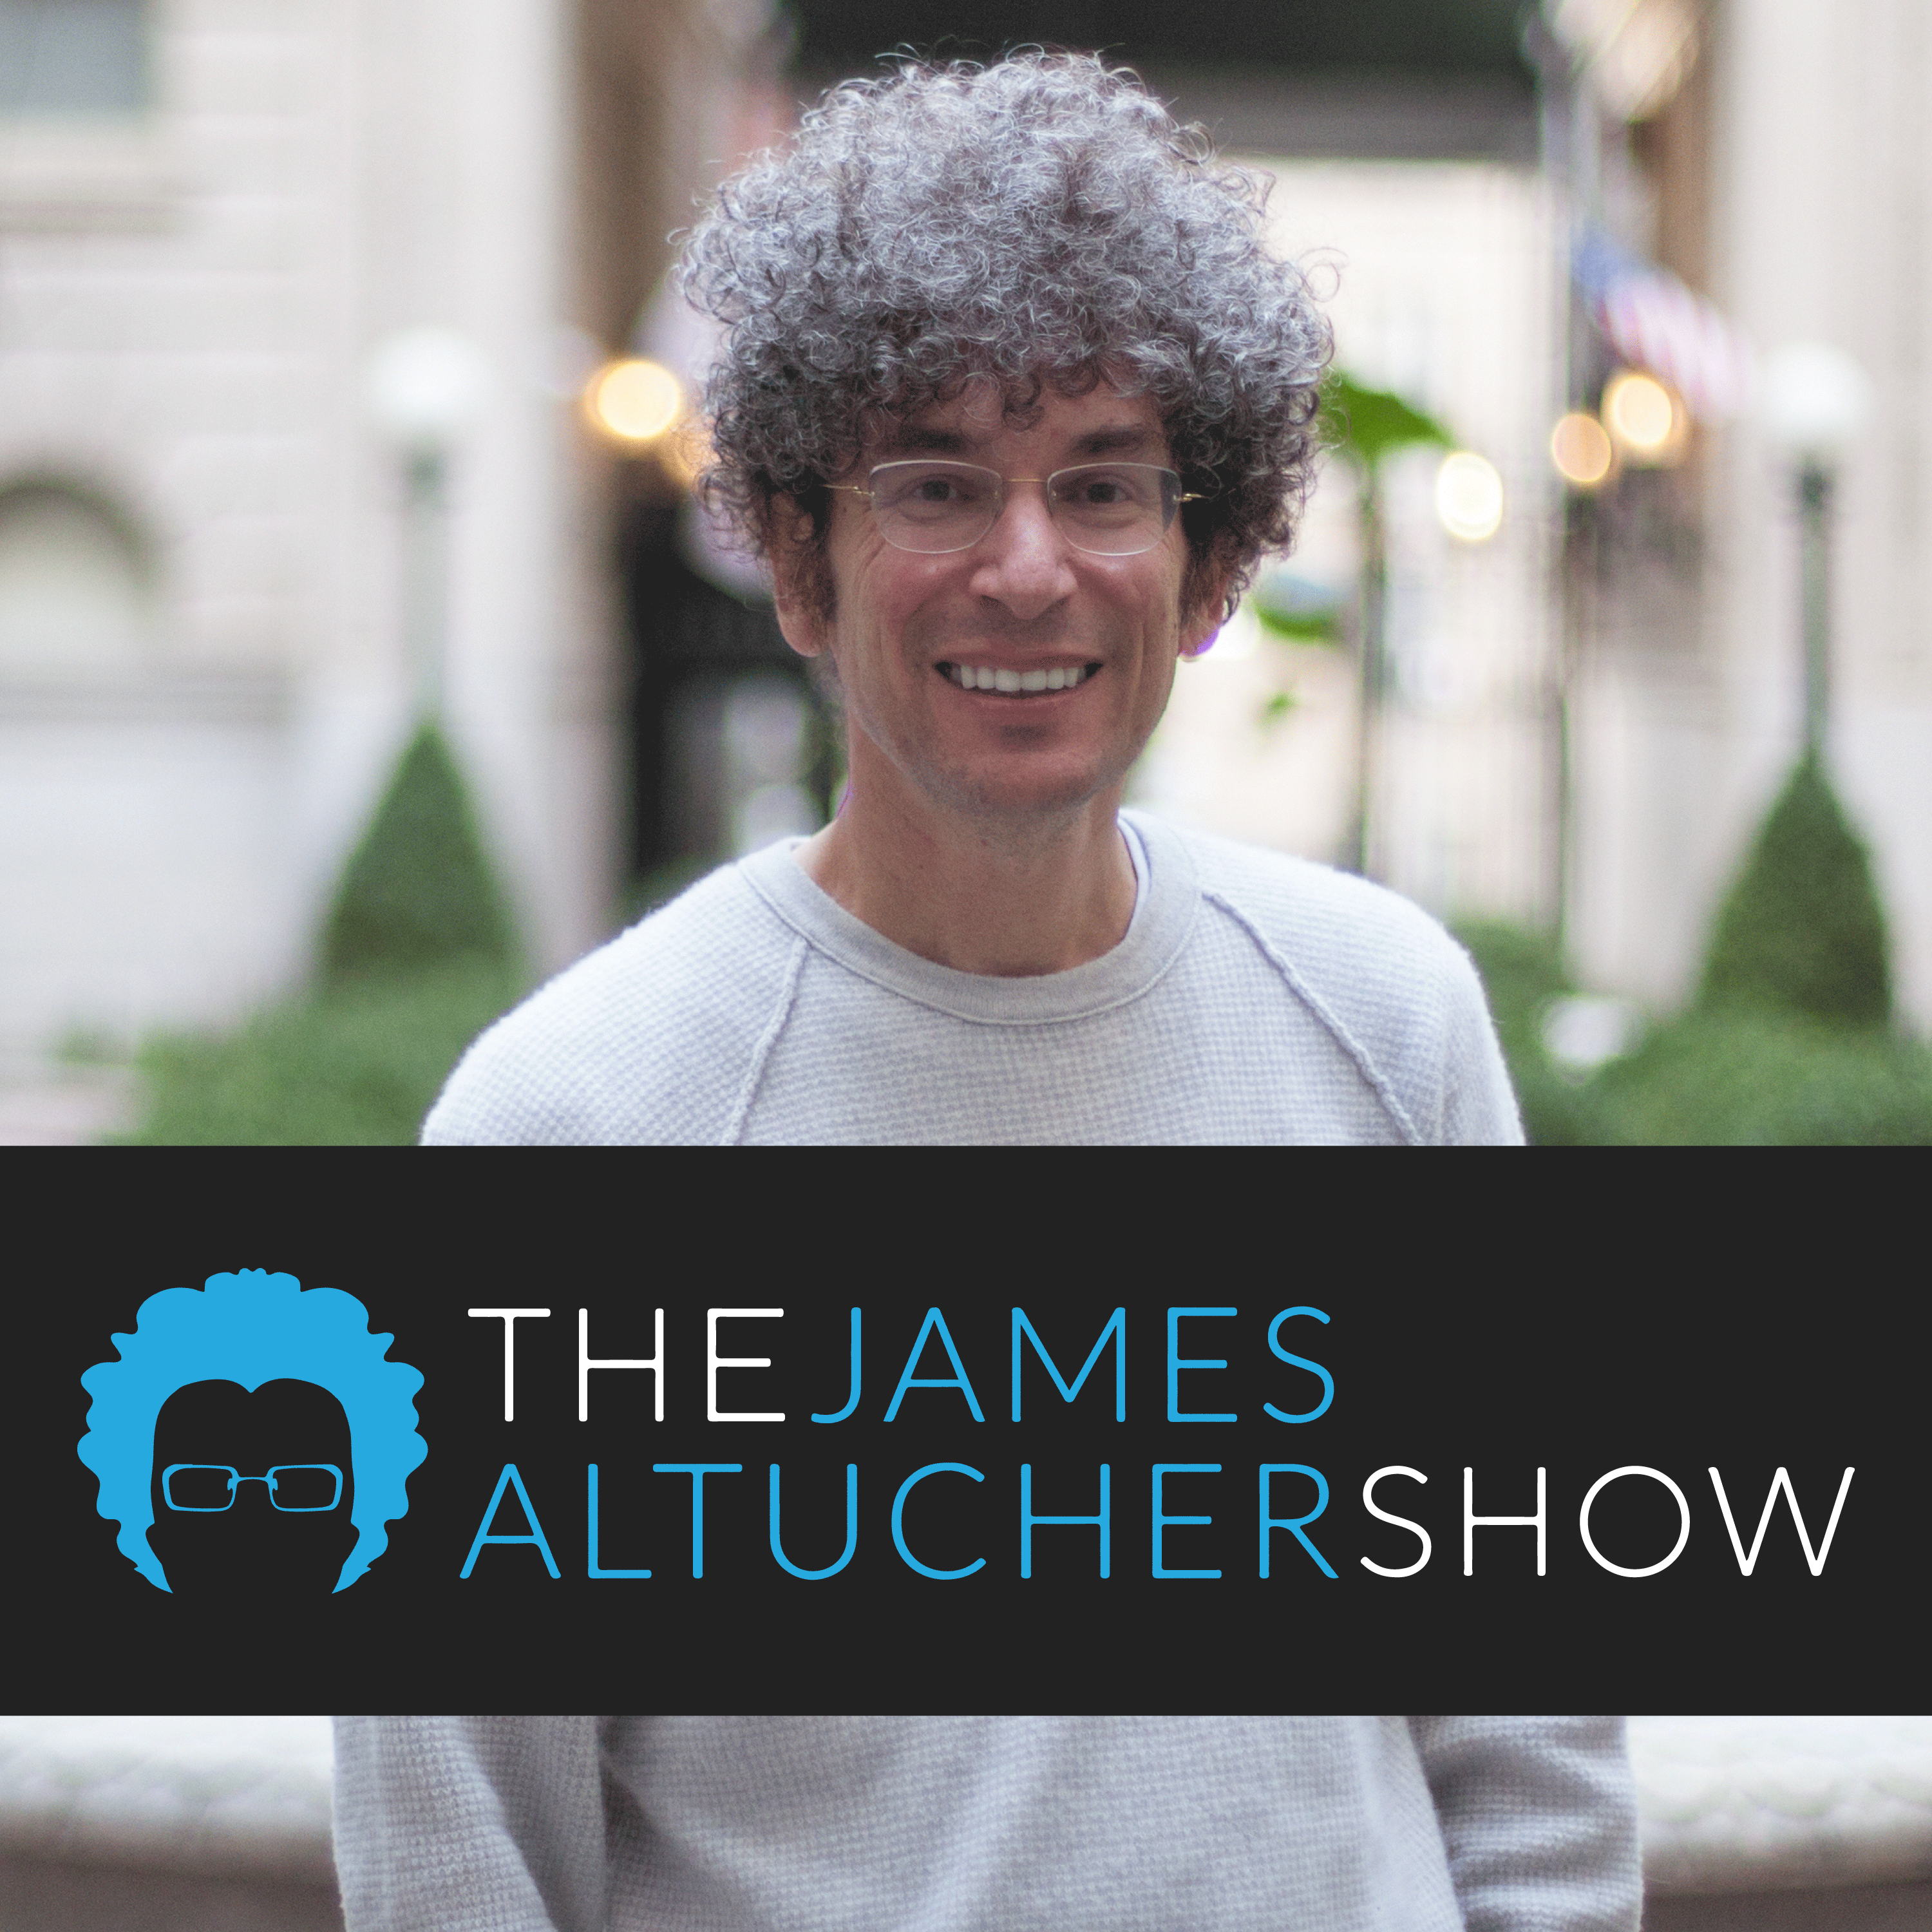 To Practice His One-Liners, James Altucher Did Stand-Up on the NYC Subway